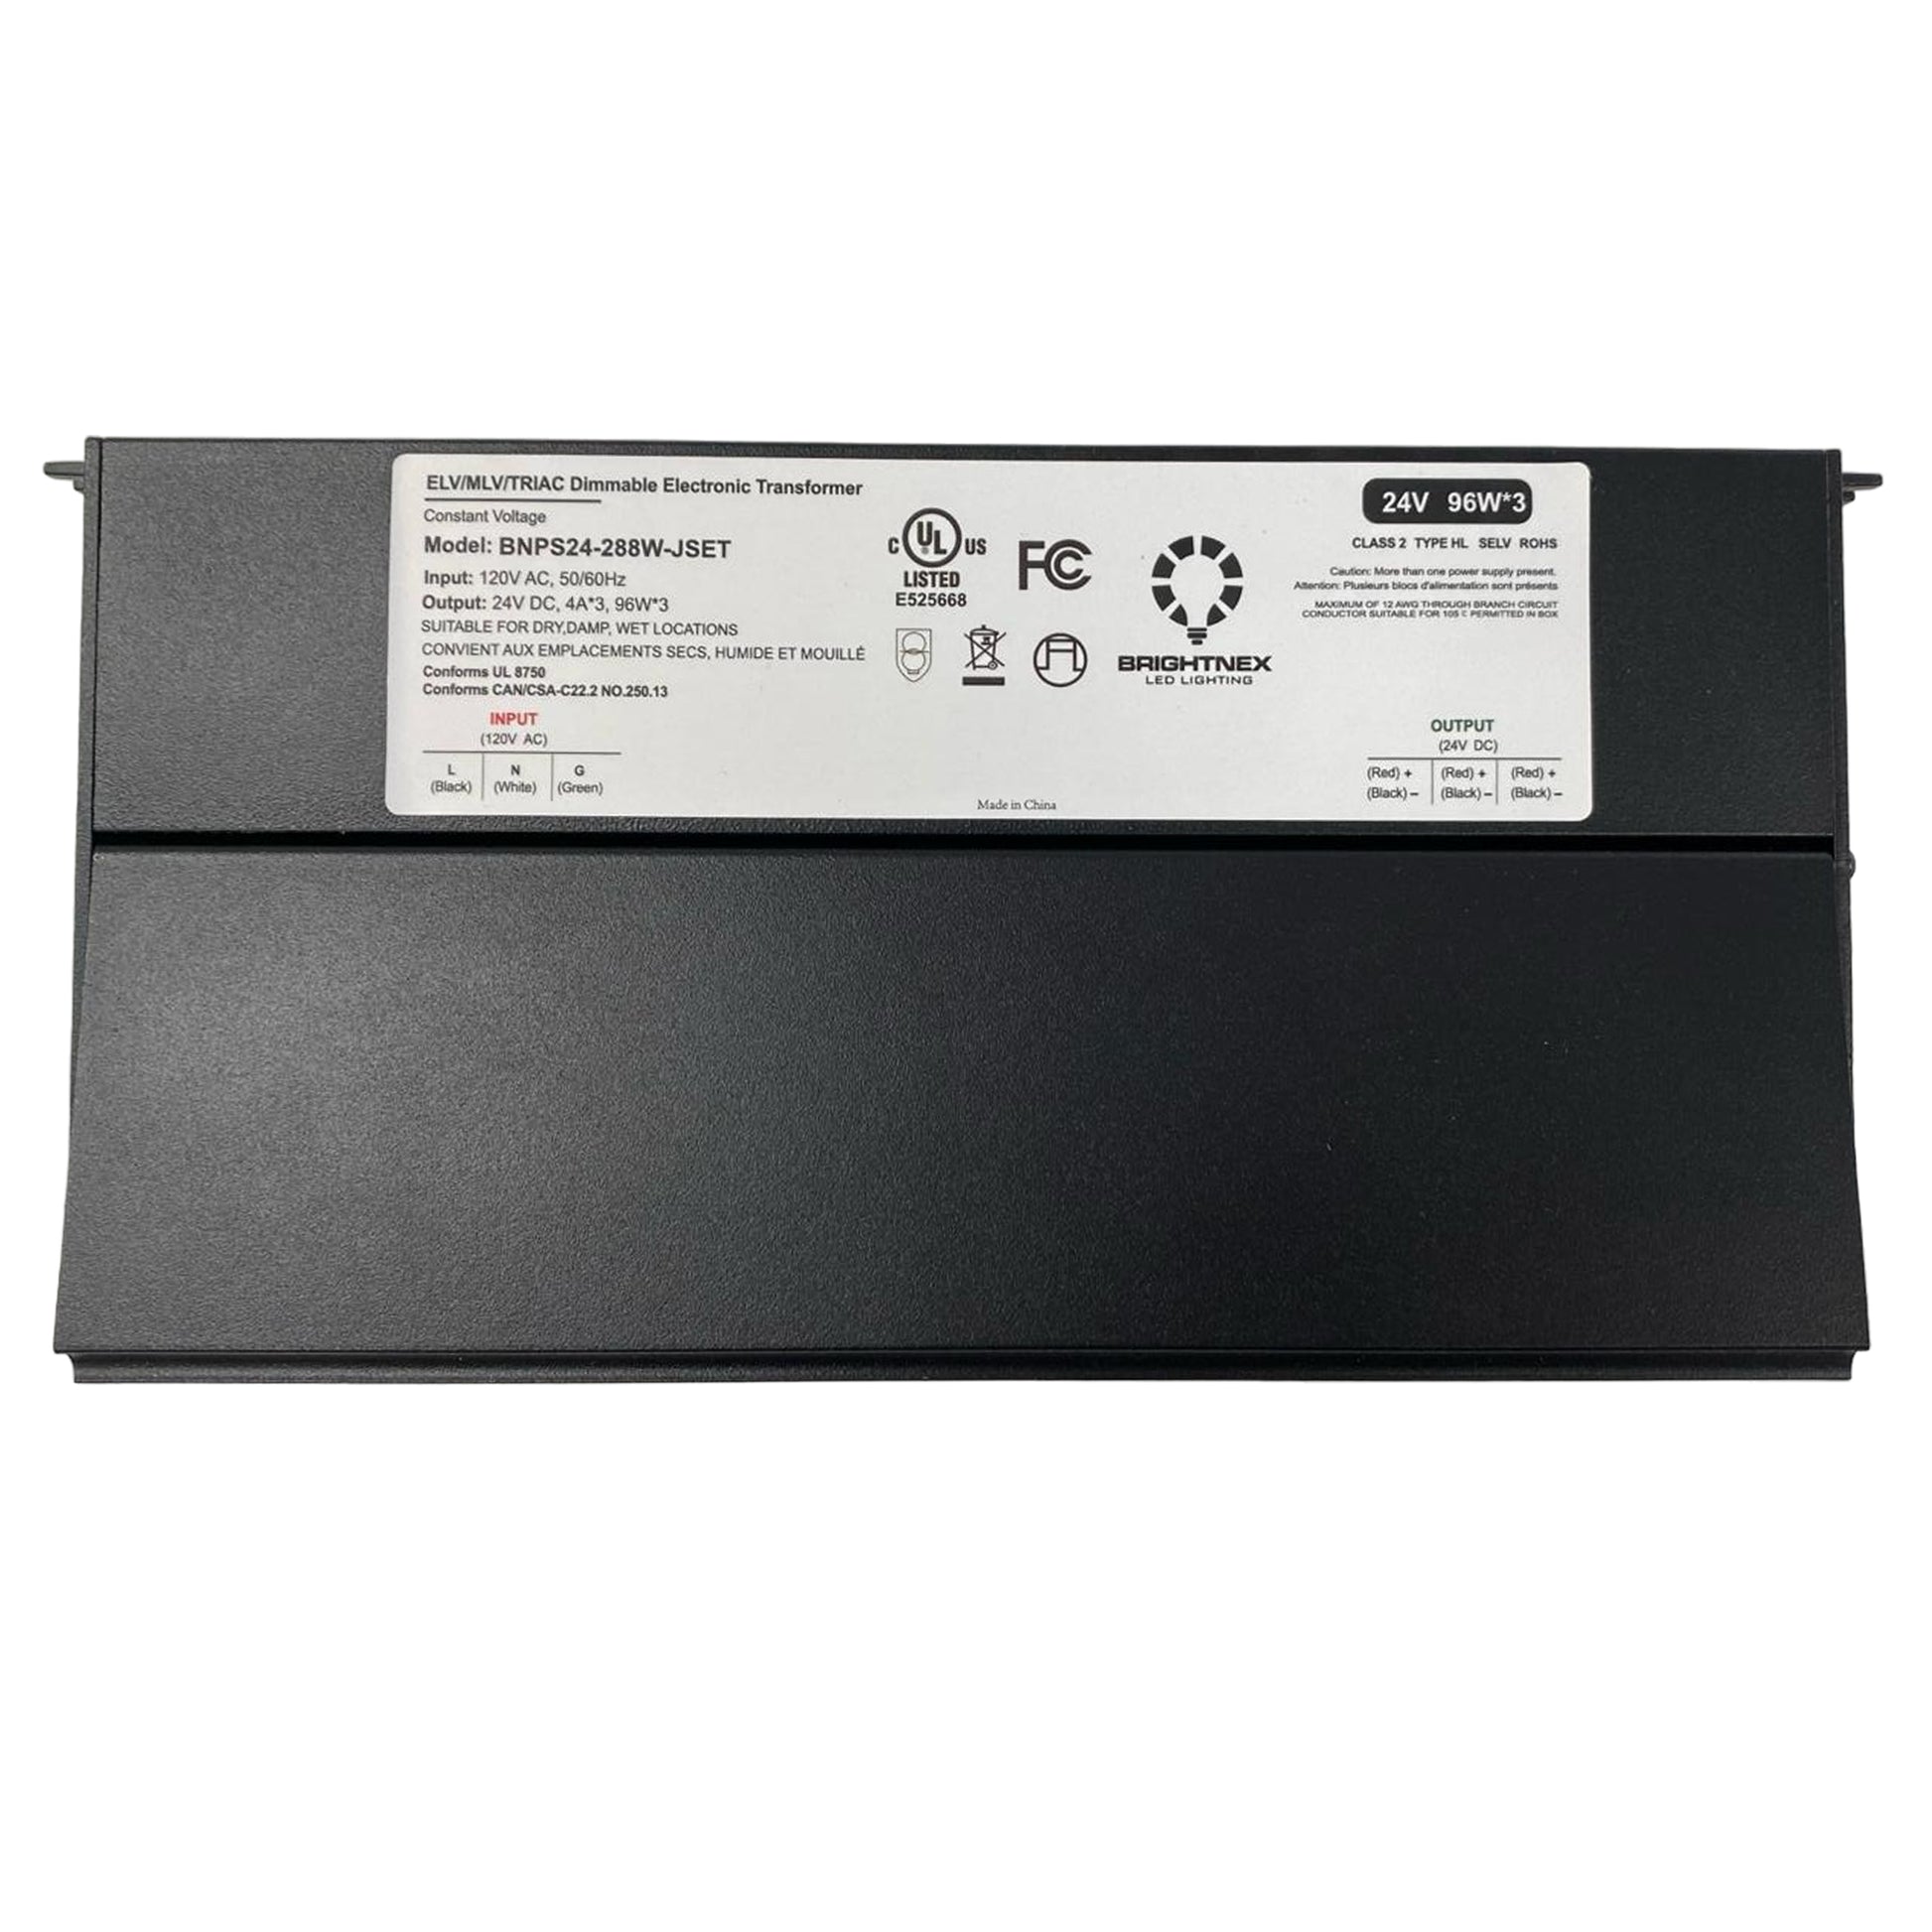 Dimmable LED Driver 24V, 288W for Wet, Damp, Dry Locations, Class 2, UL Certified, Dimmable LED Transformer